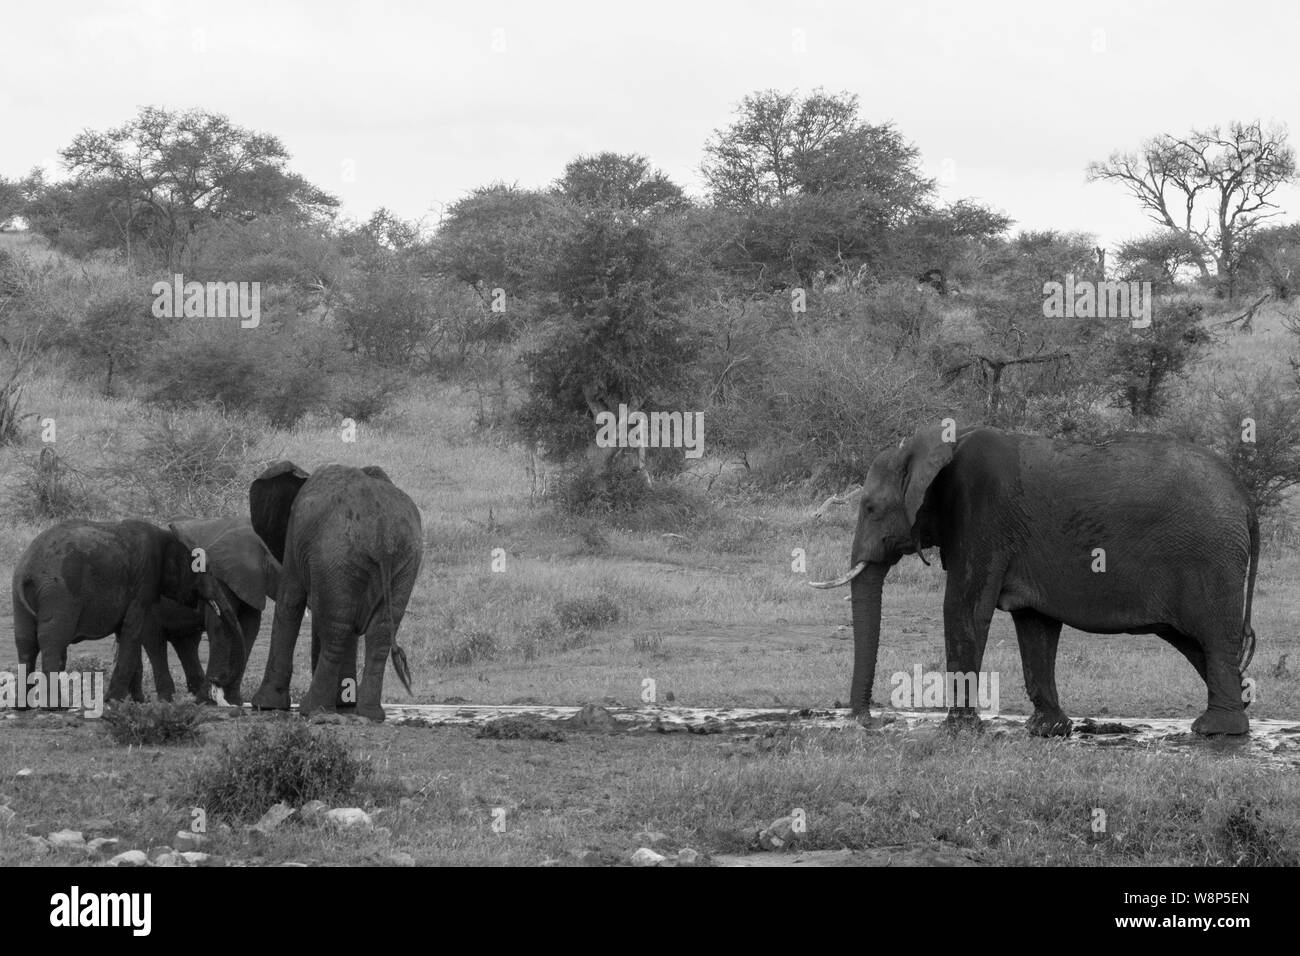 A Parade of Elephants at a Watering Hole in Black and White -  a large family roaming in the wild Stock Photo